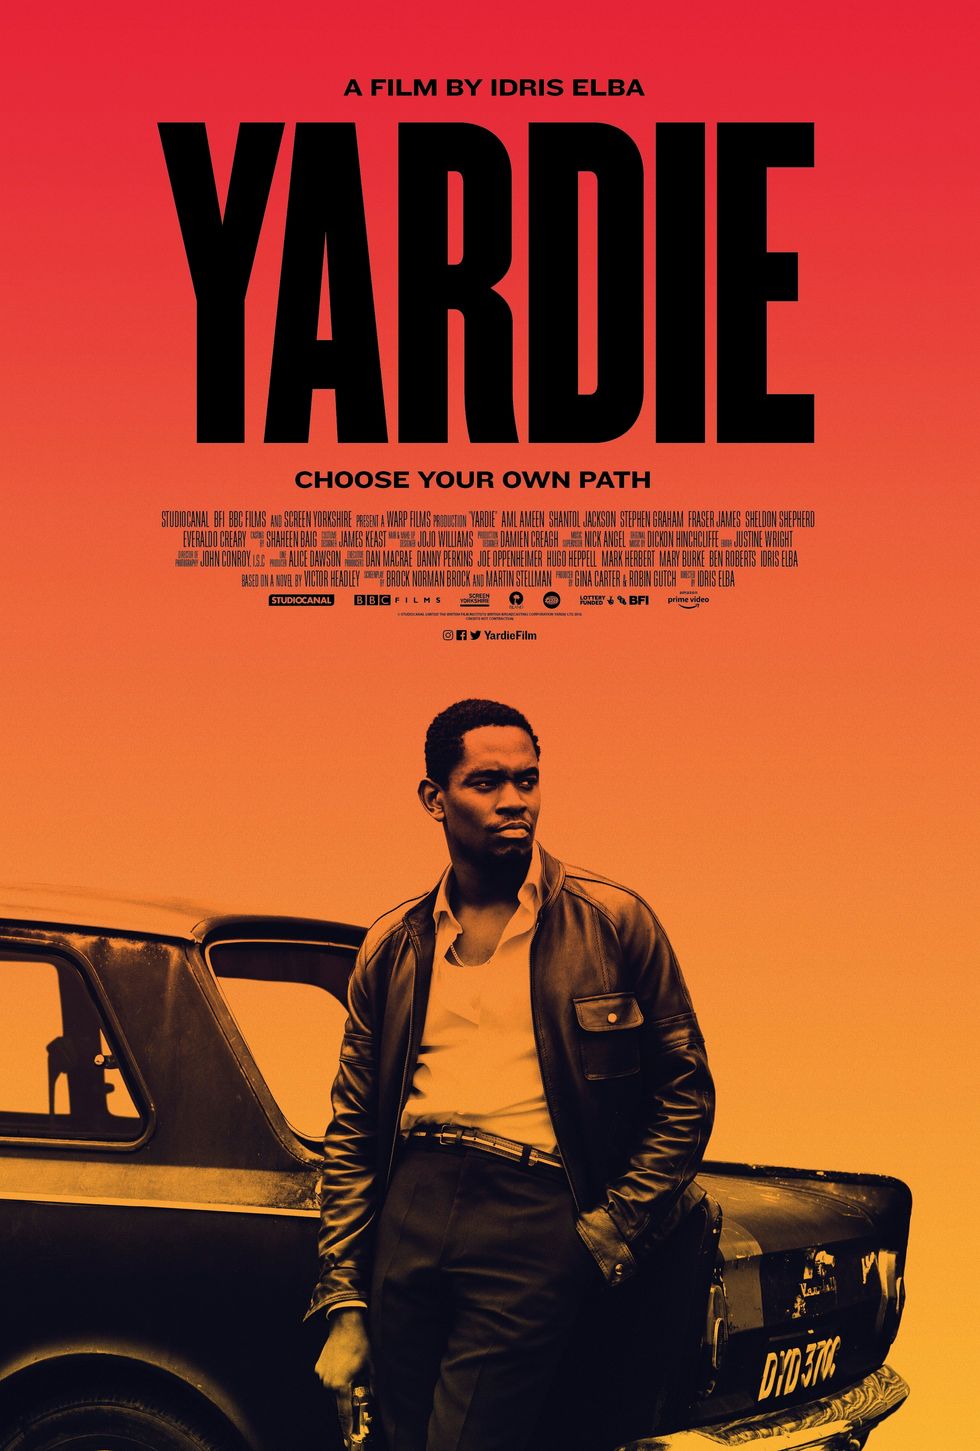 Idris Elba's Directorial Debut 'Yardie' Is Coming to Theaters In March